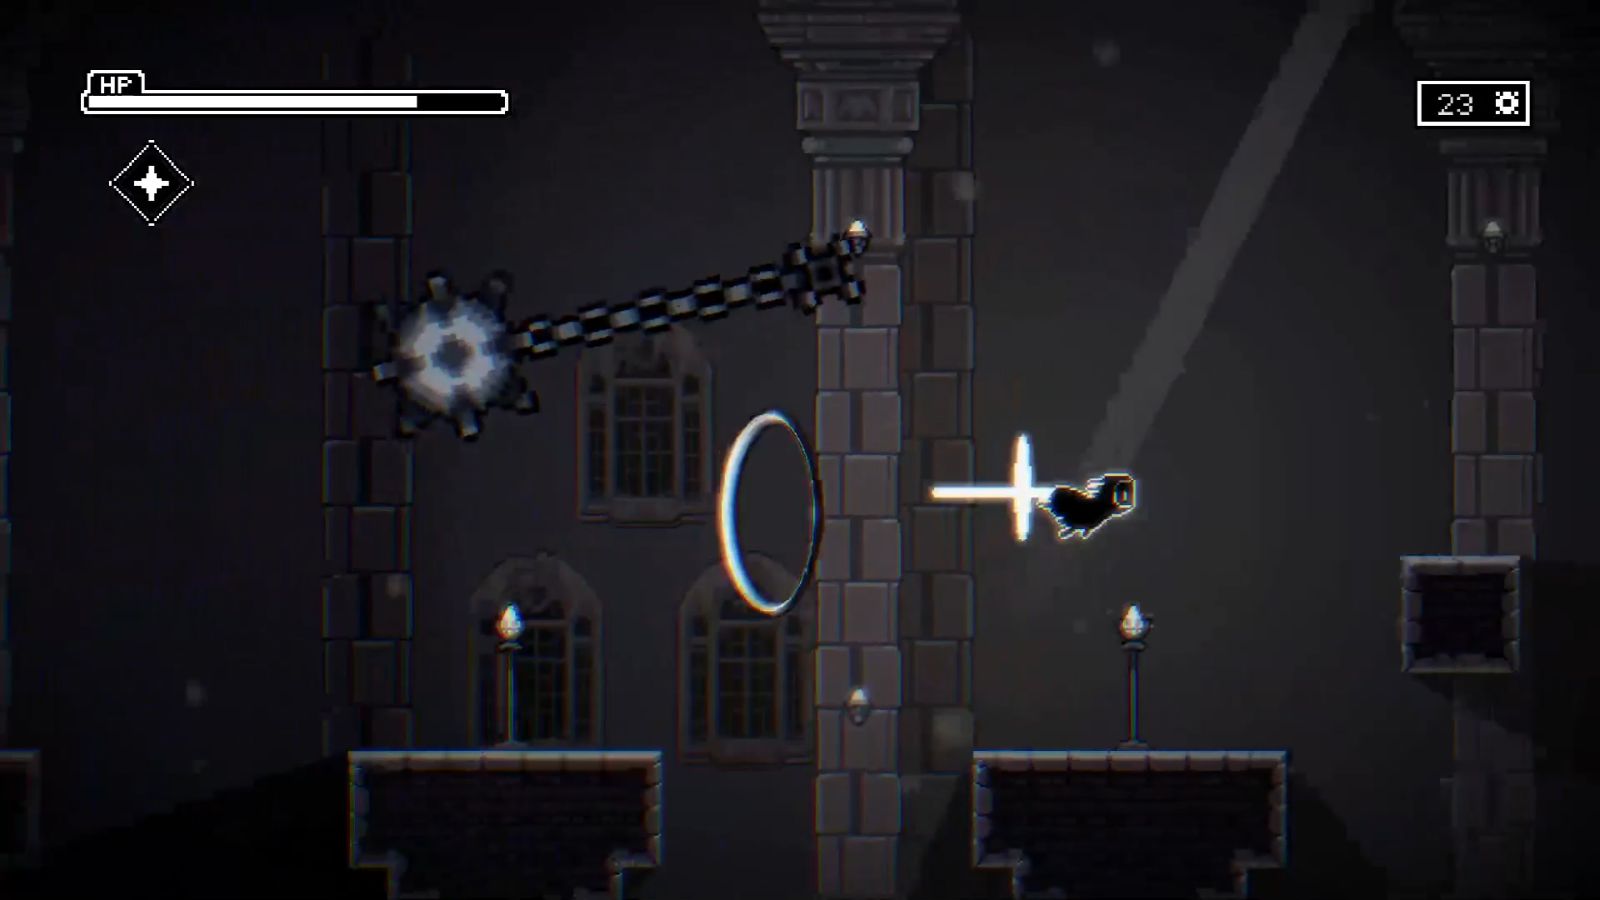 A hooded character jumps between two platforms while dodging a swinging ball and chain.